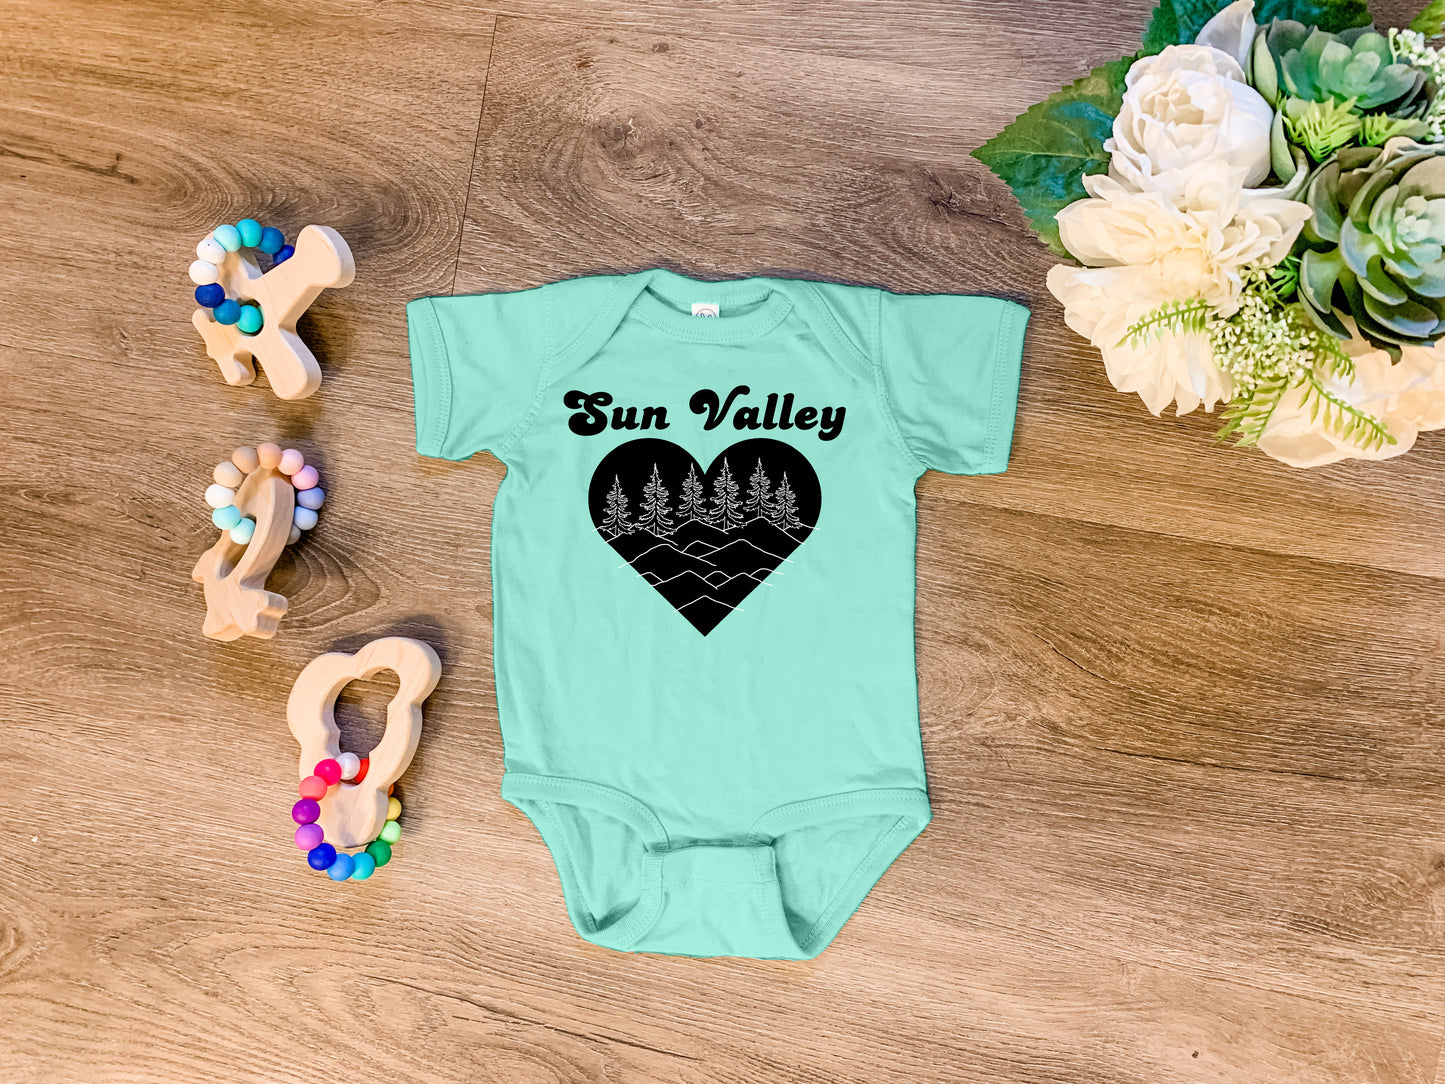 a baby bodysuit with the sun valley written on it